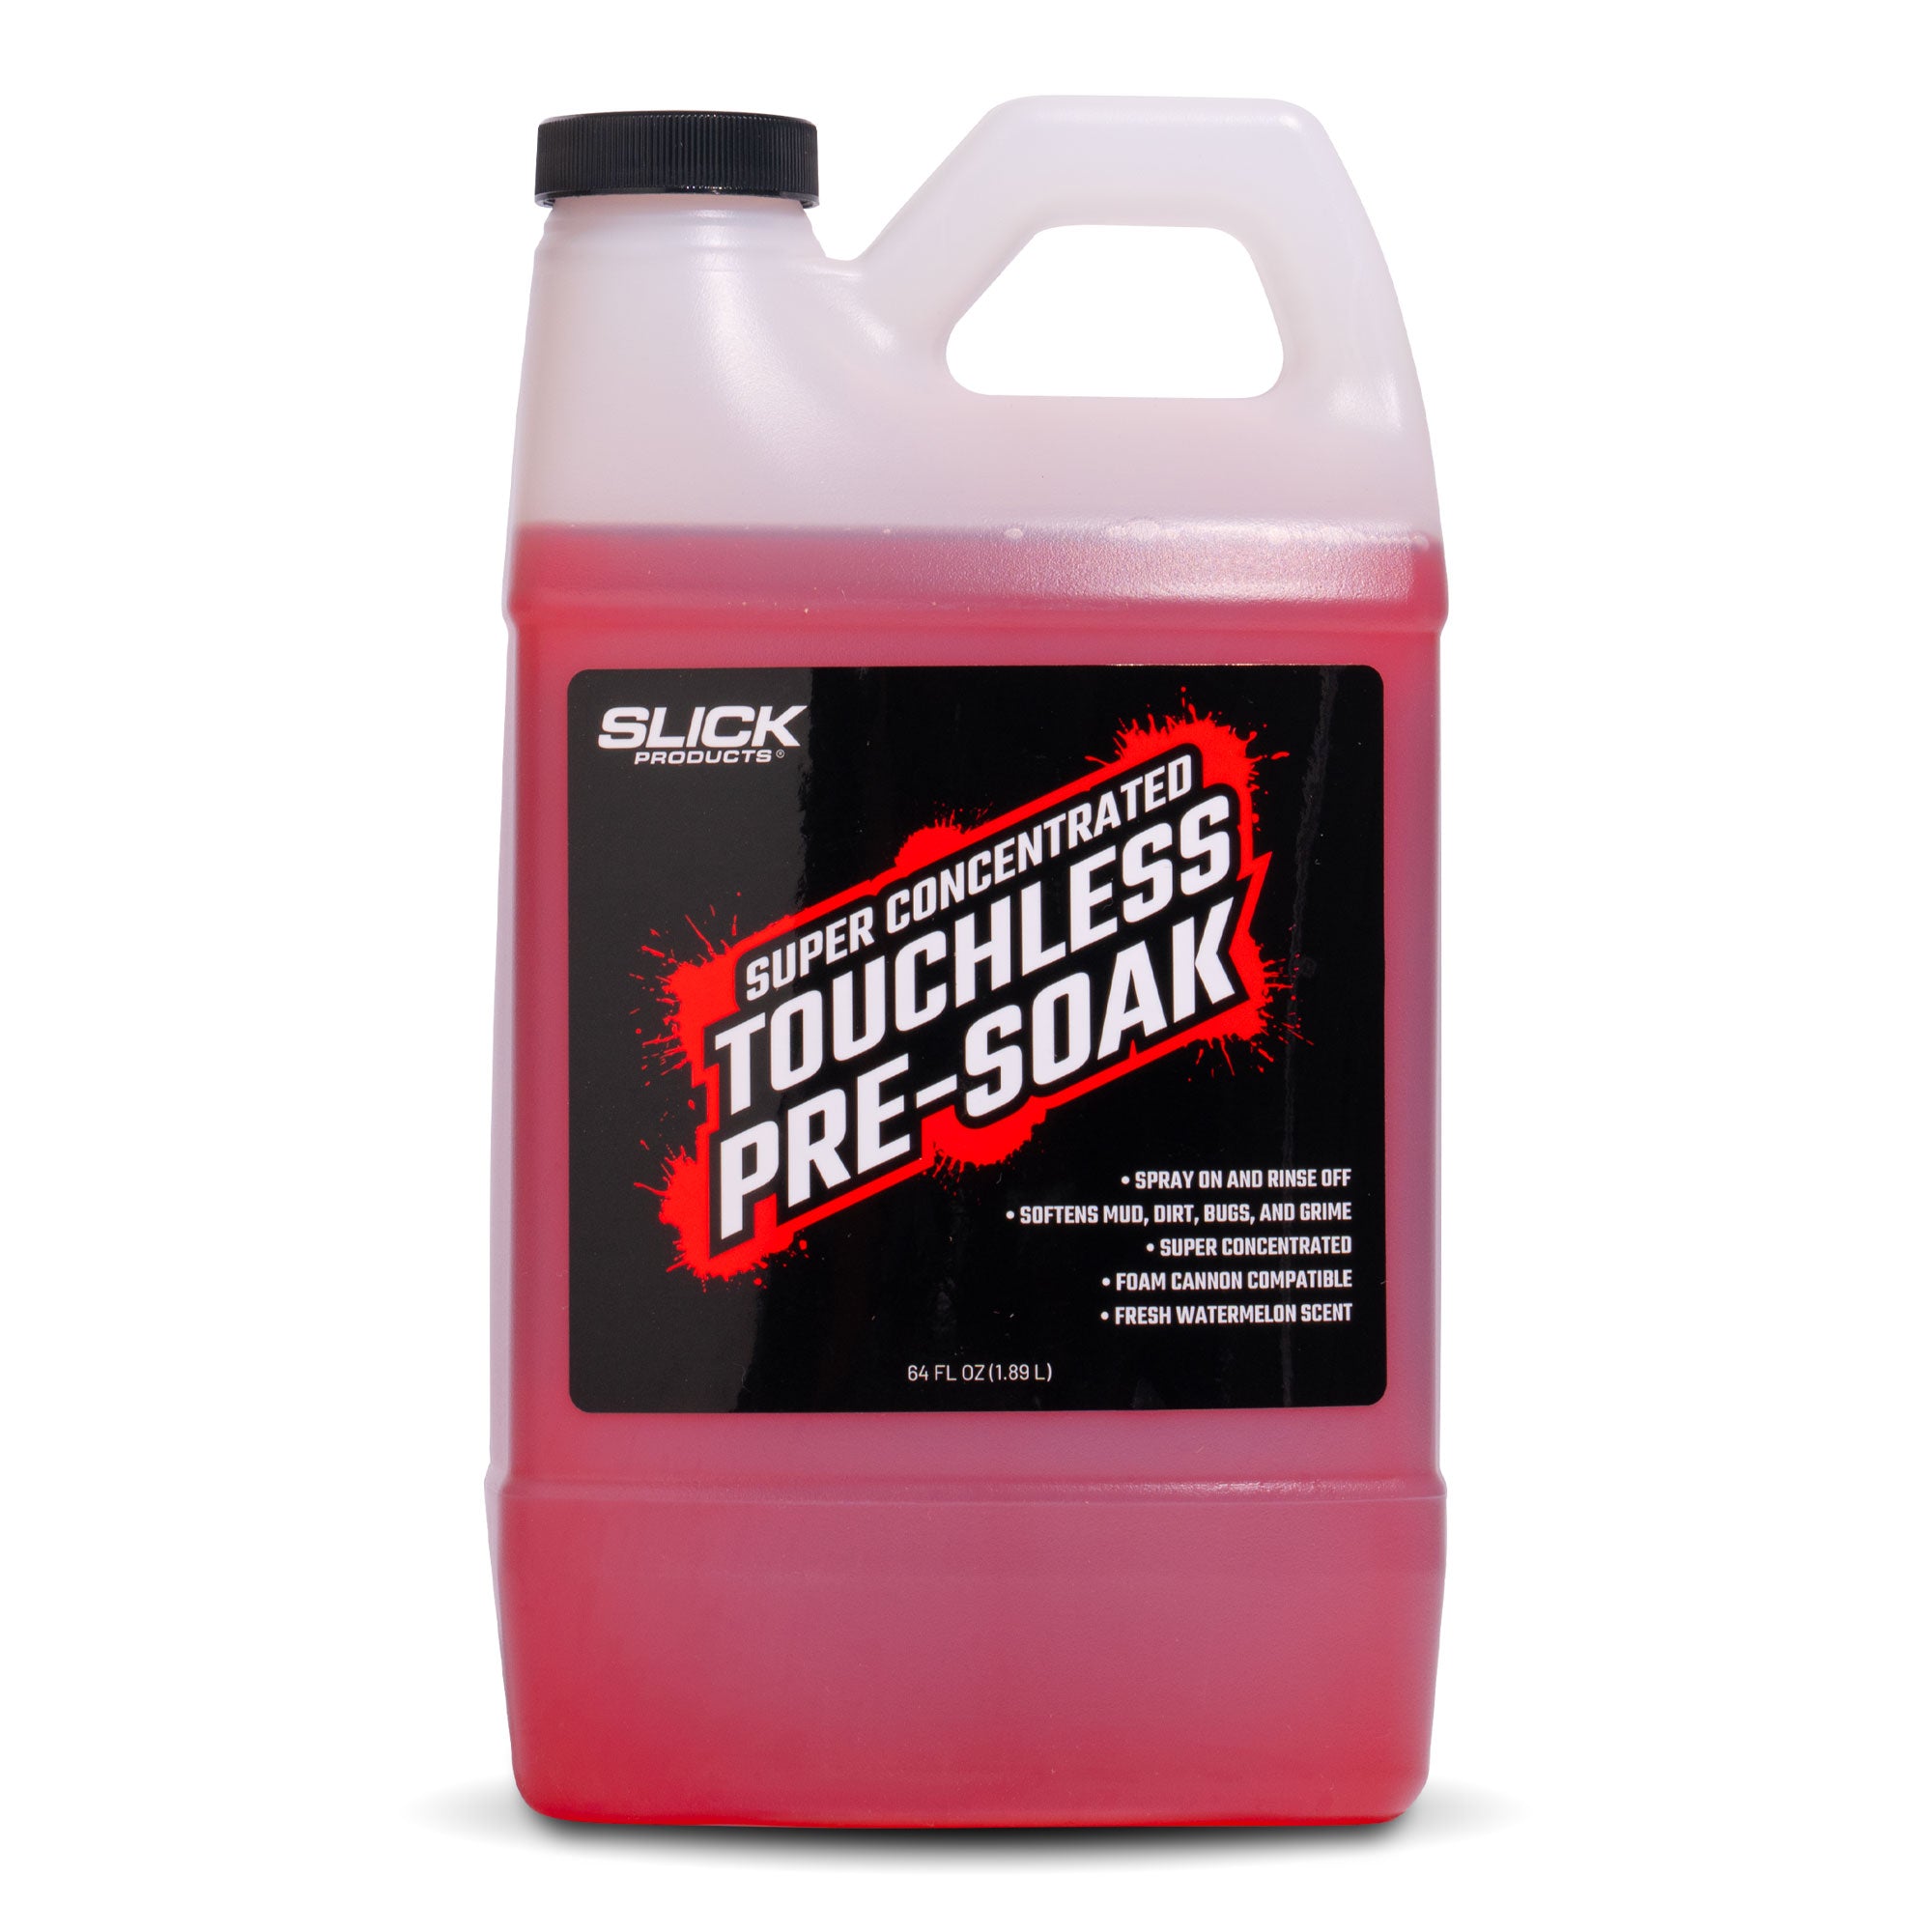 Touchless Truck Wash Soap, Touchless 2 (5 Gallon)